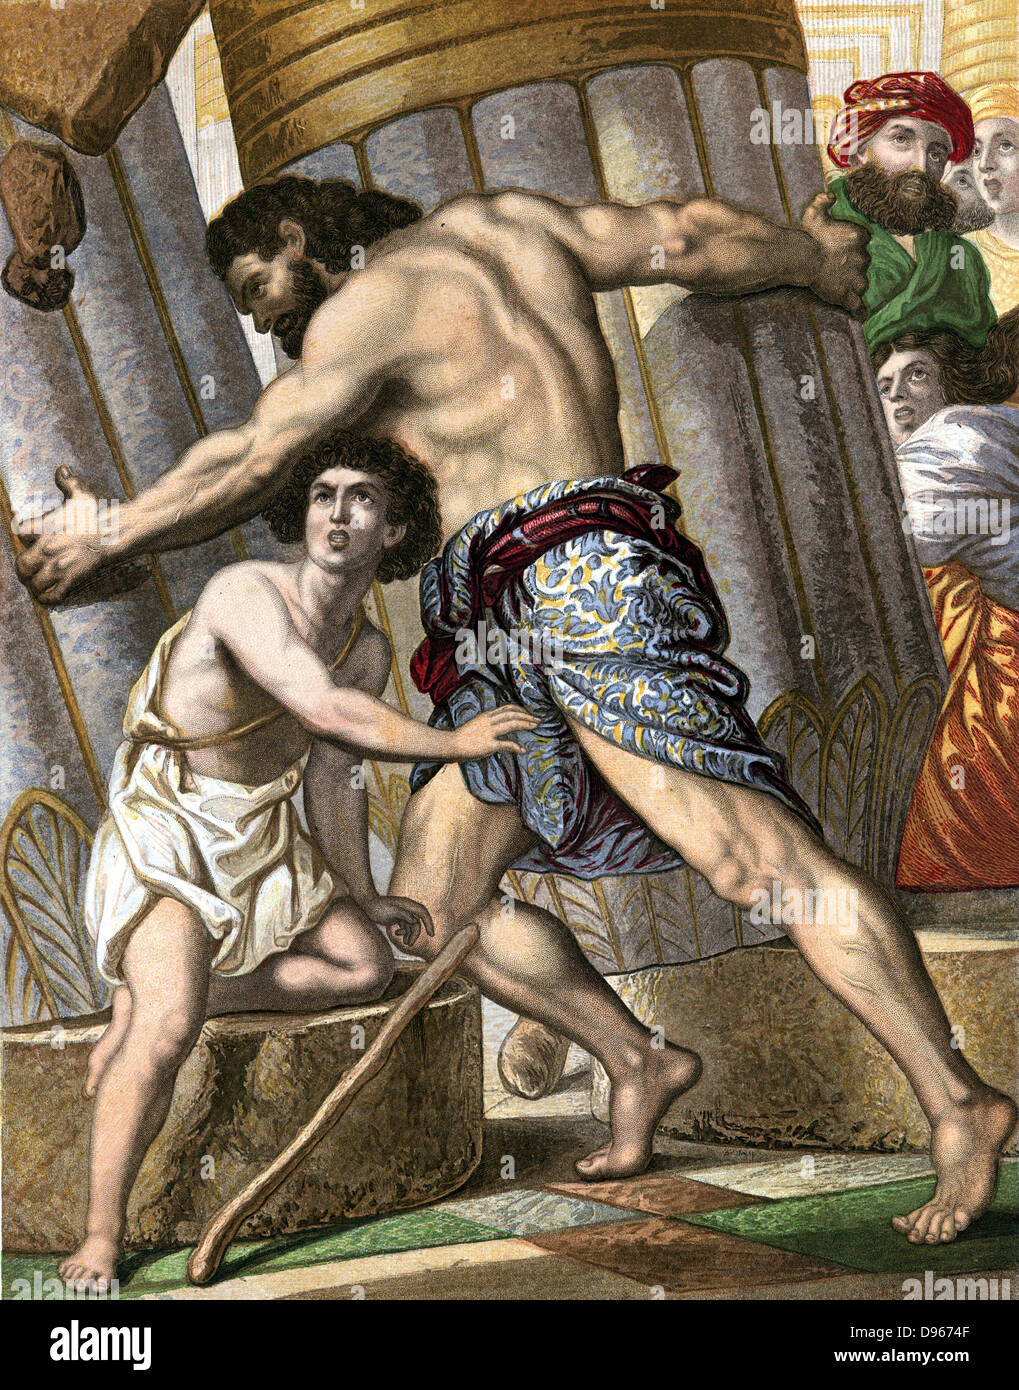 Samson pulling down the Temple of Dagon, god of the Philistines. Bible: Judges XVI. Mid-19th century chromolithograph Stock Photo